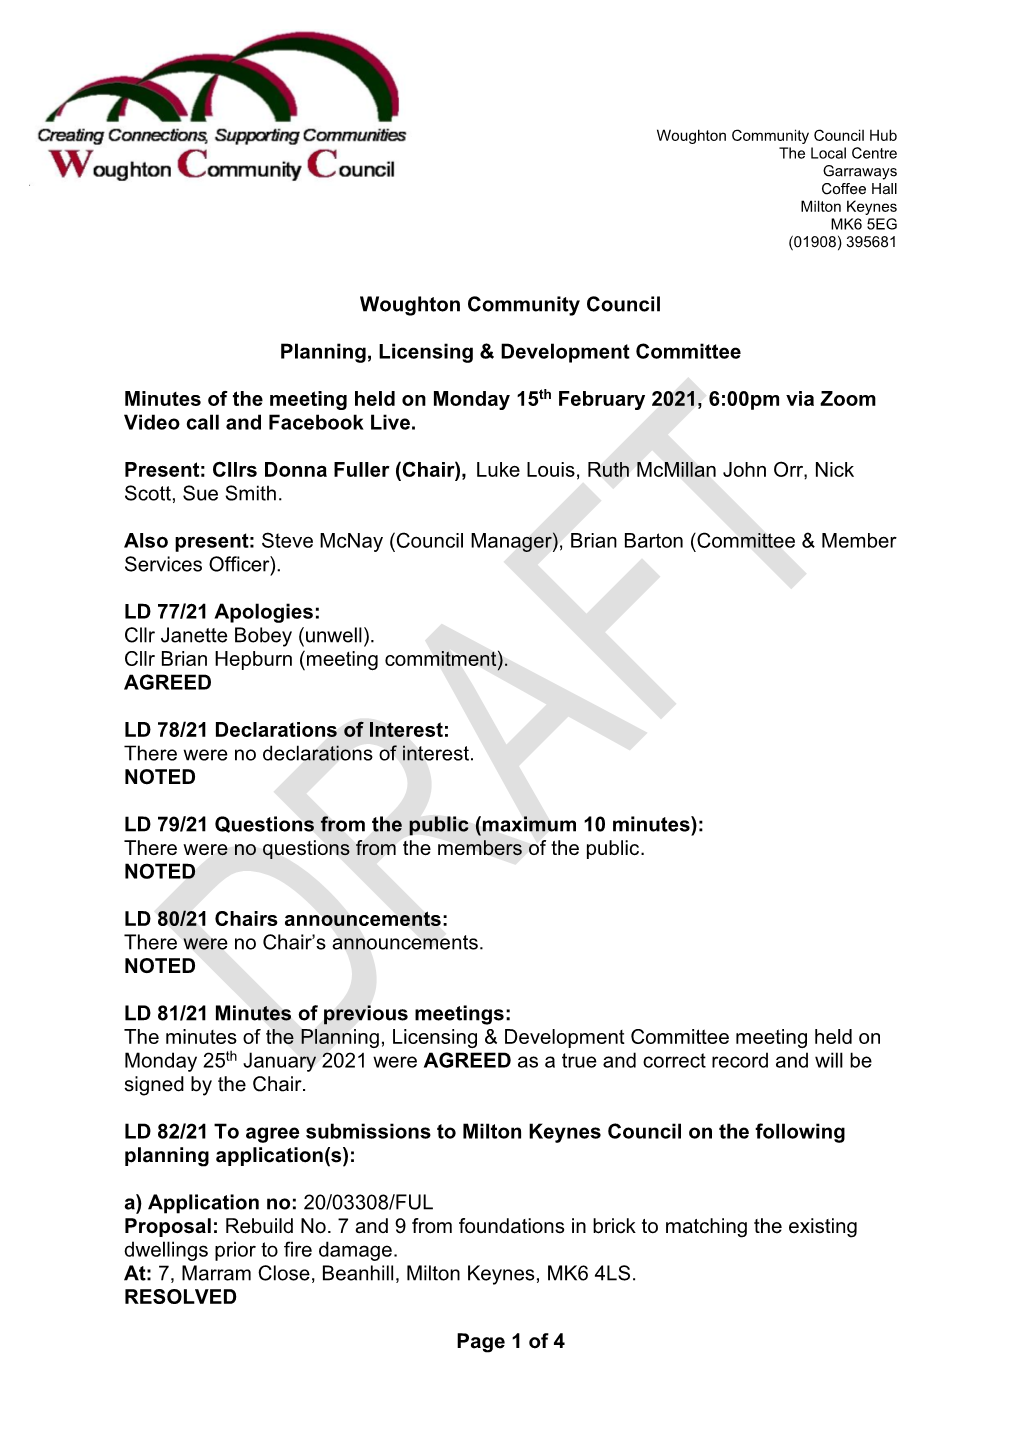 Page 1 of 4 Woughton Community Council Planning, Licensing